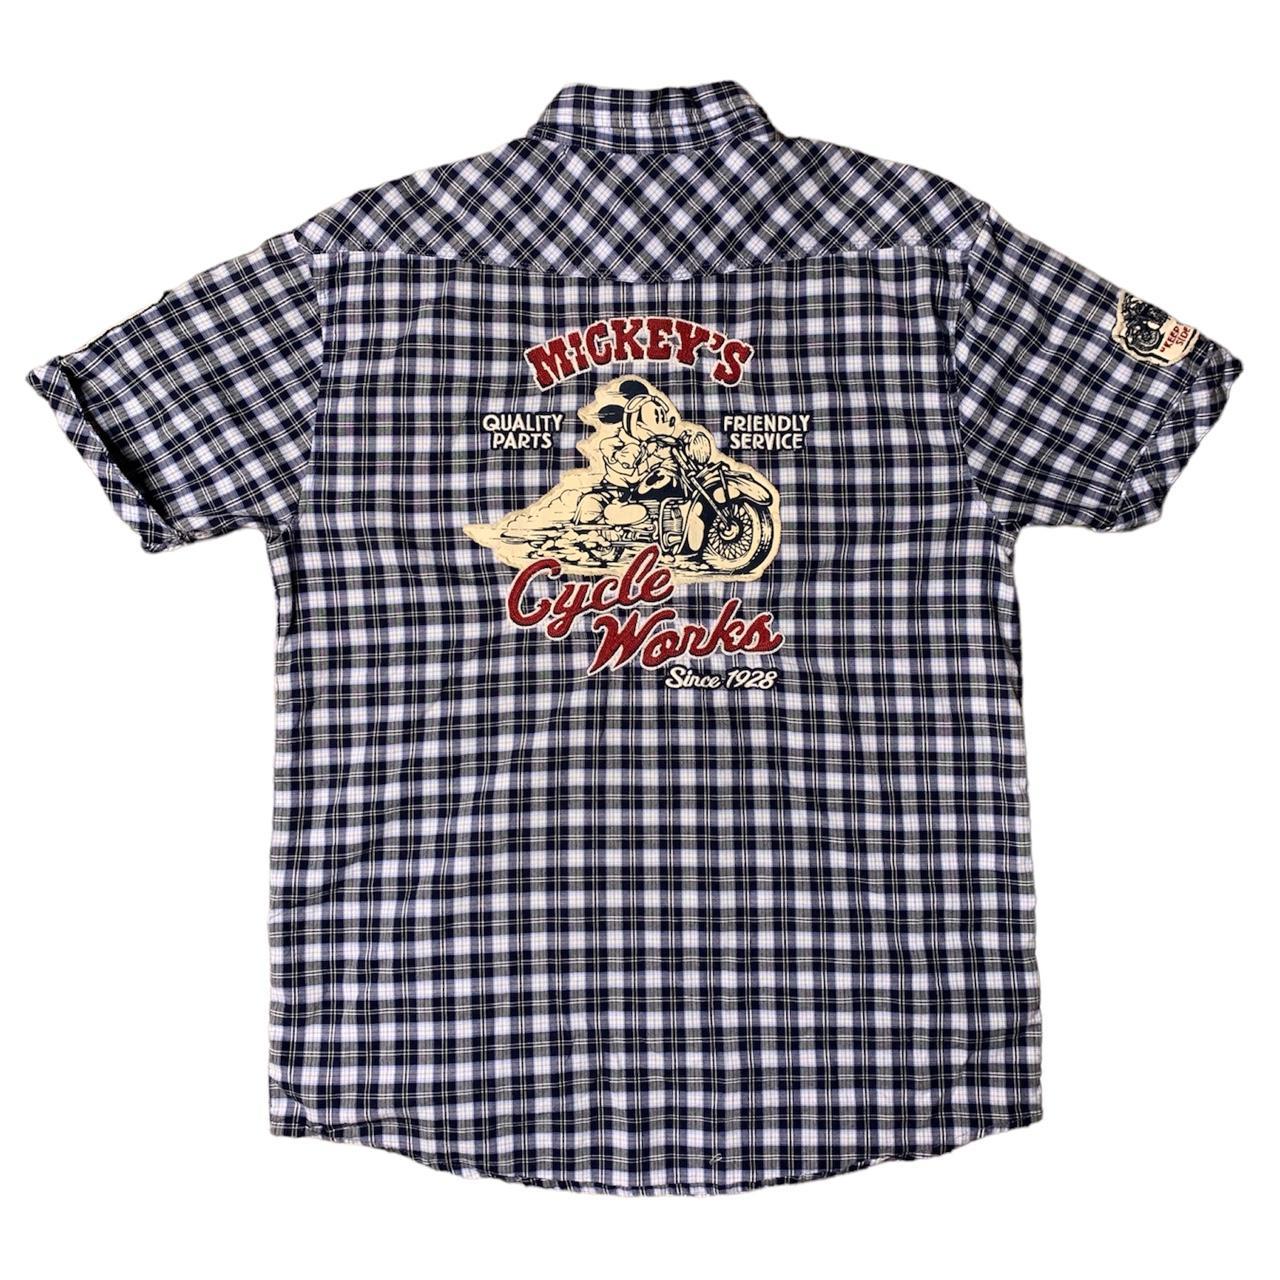 Product Image 2 - “Chief Mechanic” Mickey Button up